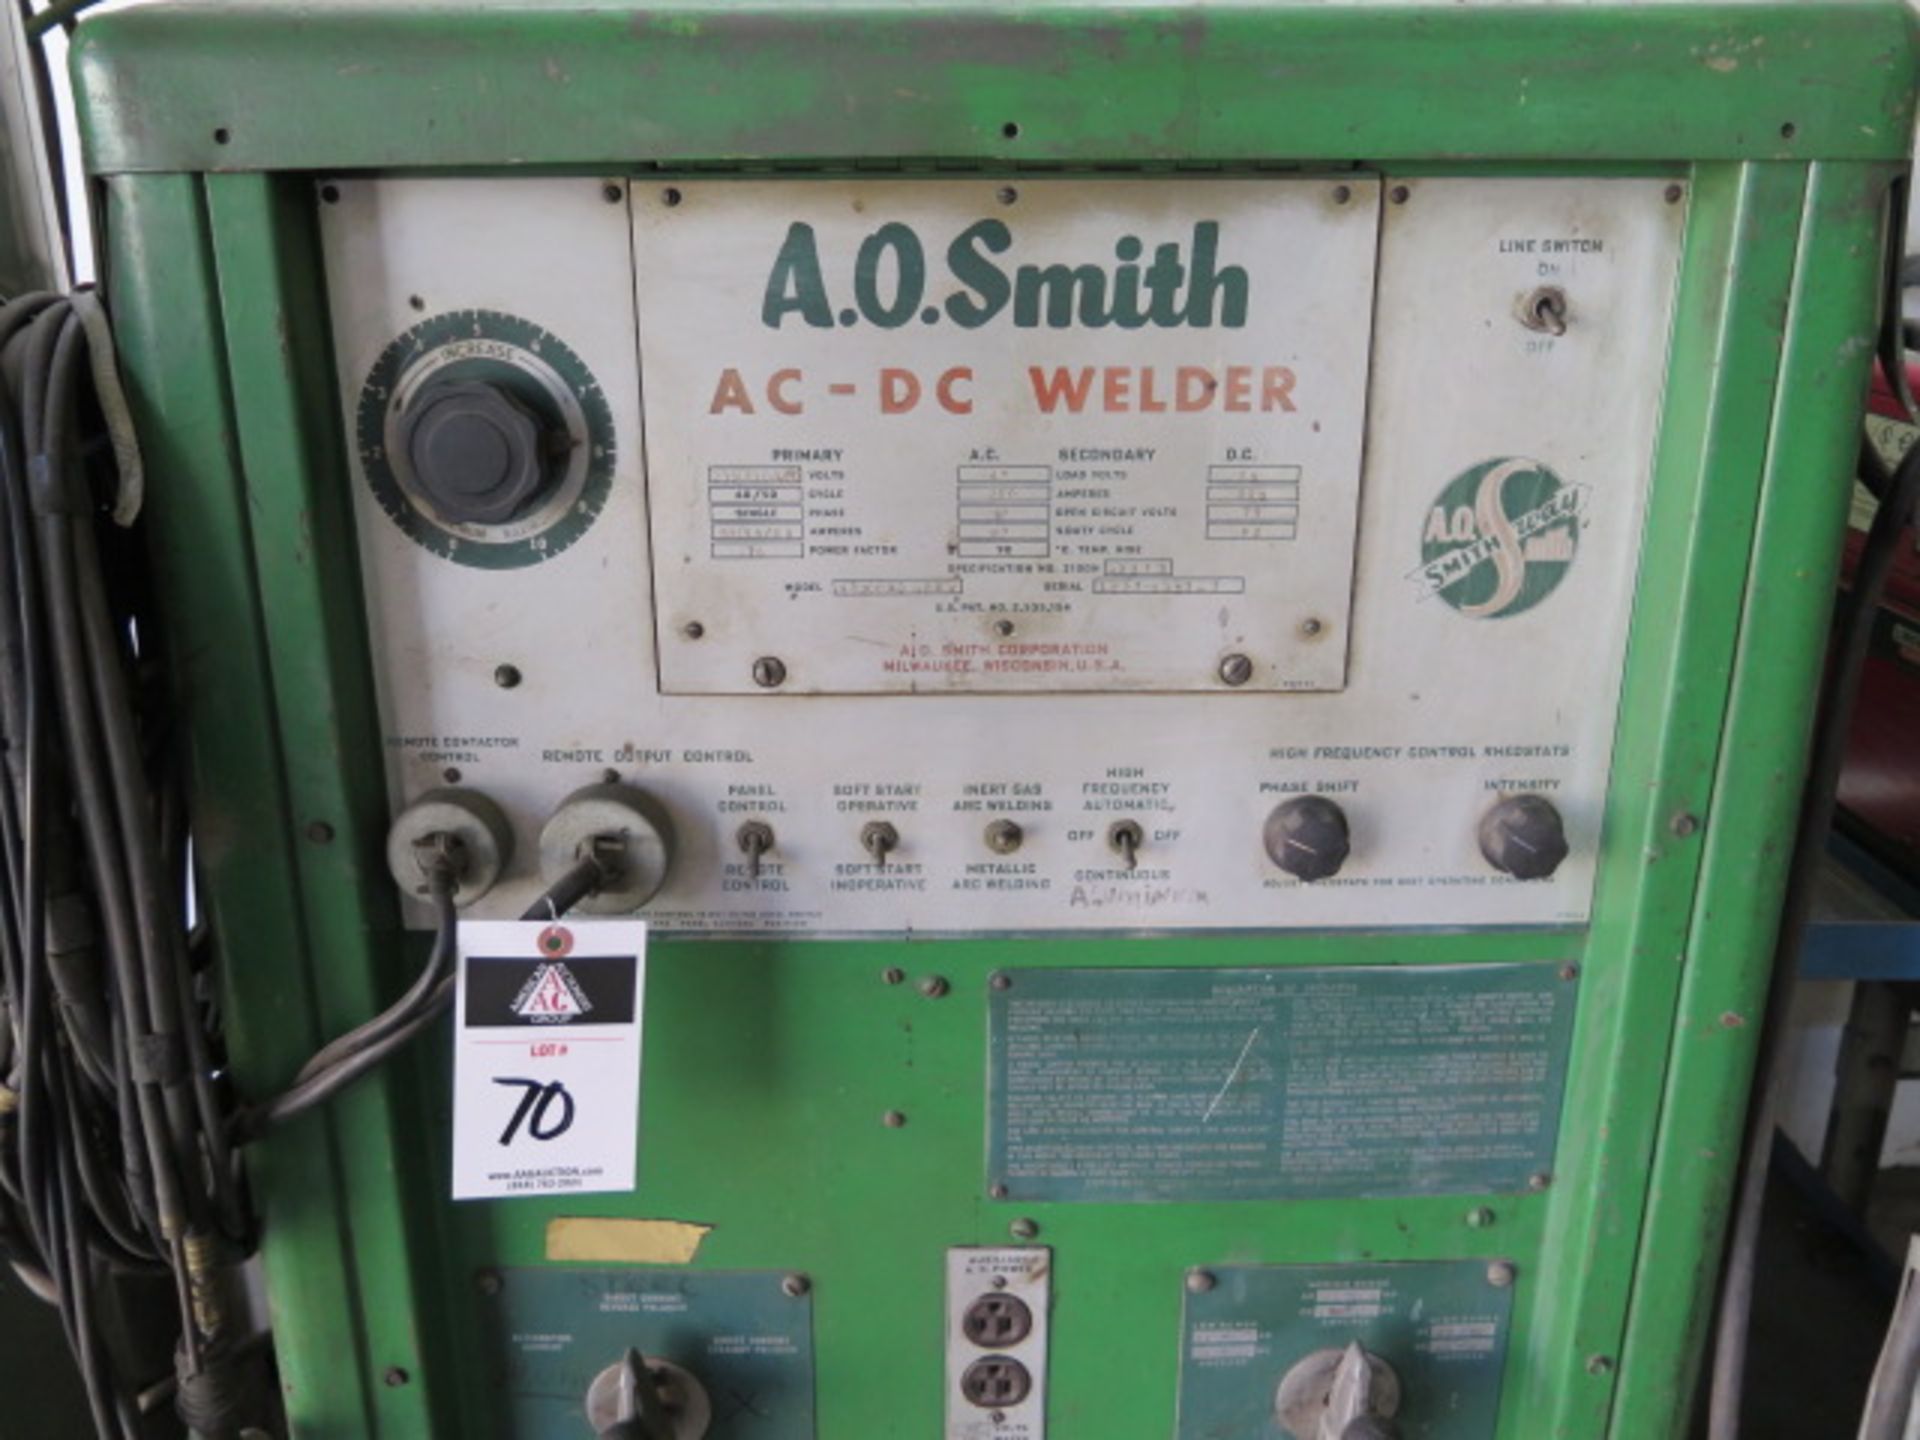 A.O. Smith mdl. A2000AD HFGW 200 Amp AC/DC Arc Welding Power Source s/n 1227-6111-7 - Image 2 of 2